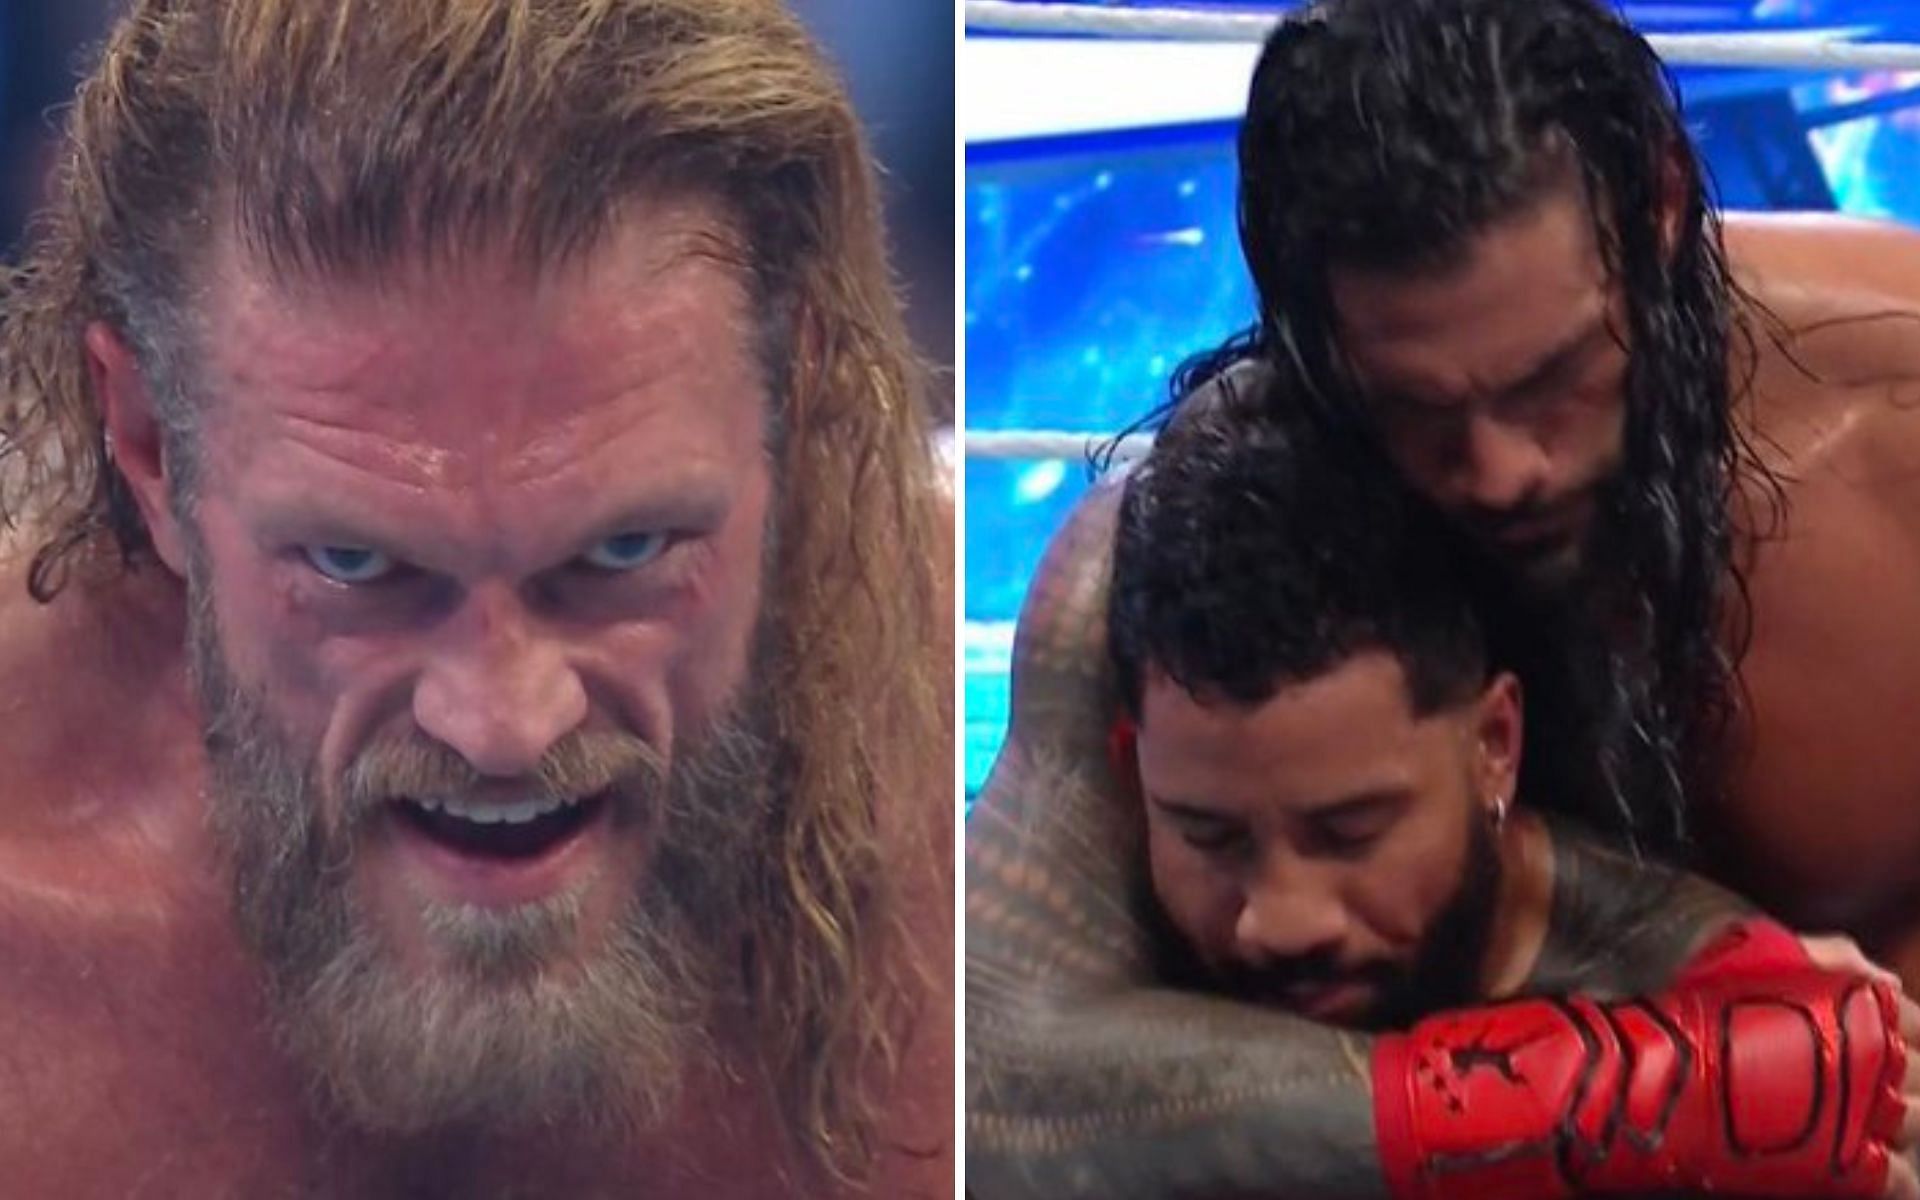 Edge had a new addition to Judgement Day; Roman Reigns stood tall